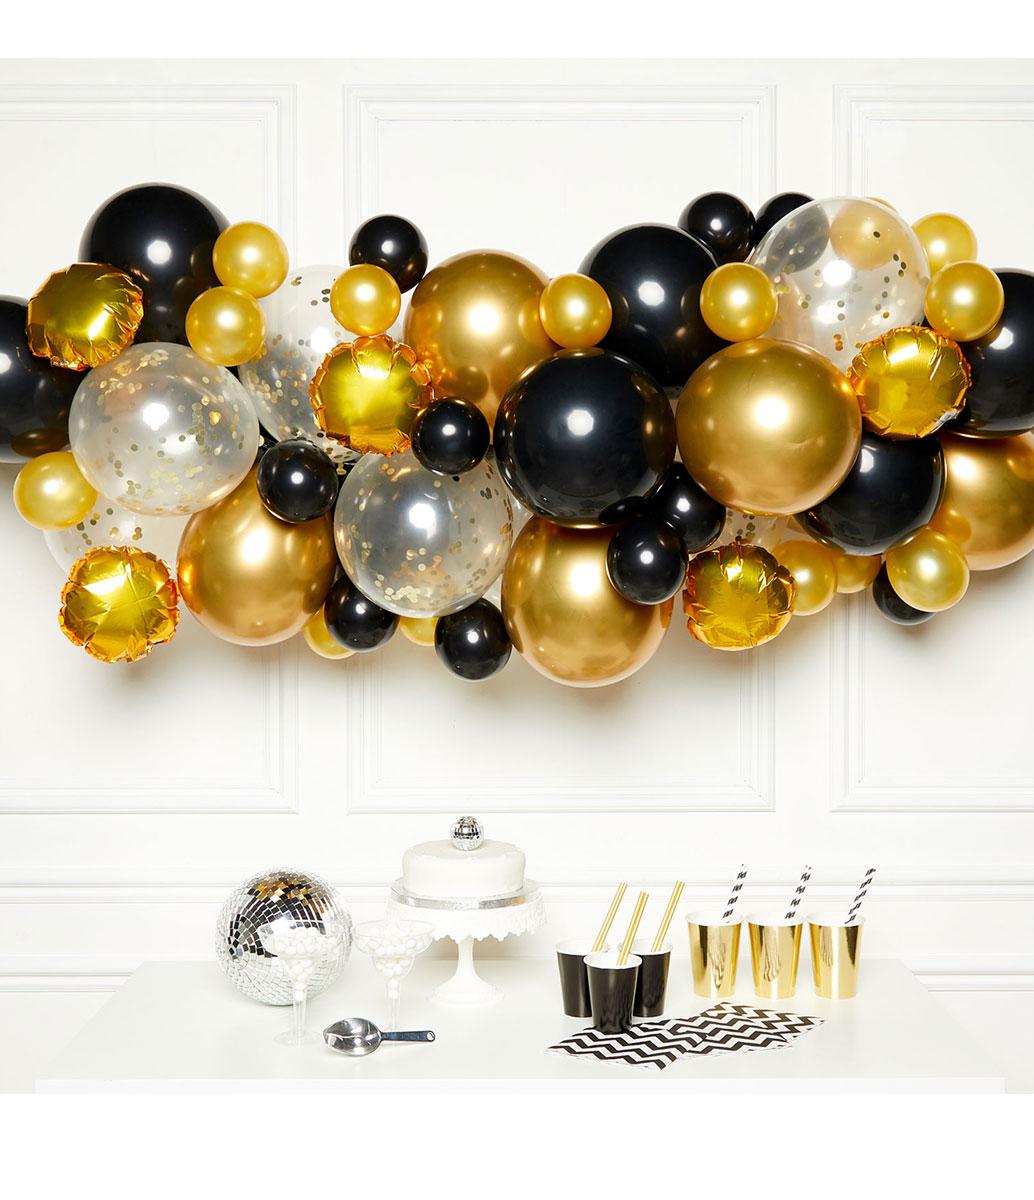 Black Gold & Silver DIY Garland Latex Balloon Arch Kit by Amscan 9907430 available here at Karnival Costumes online party shop